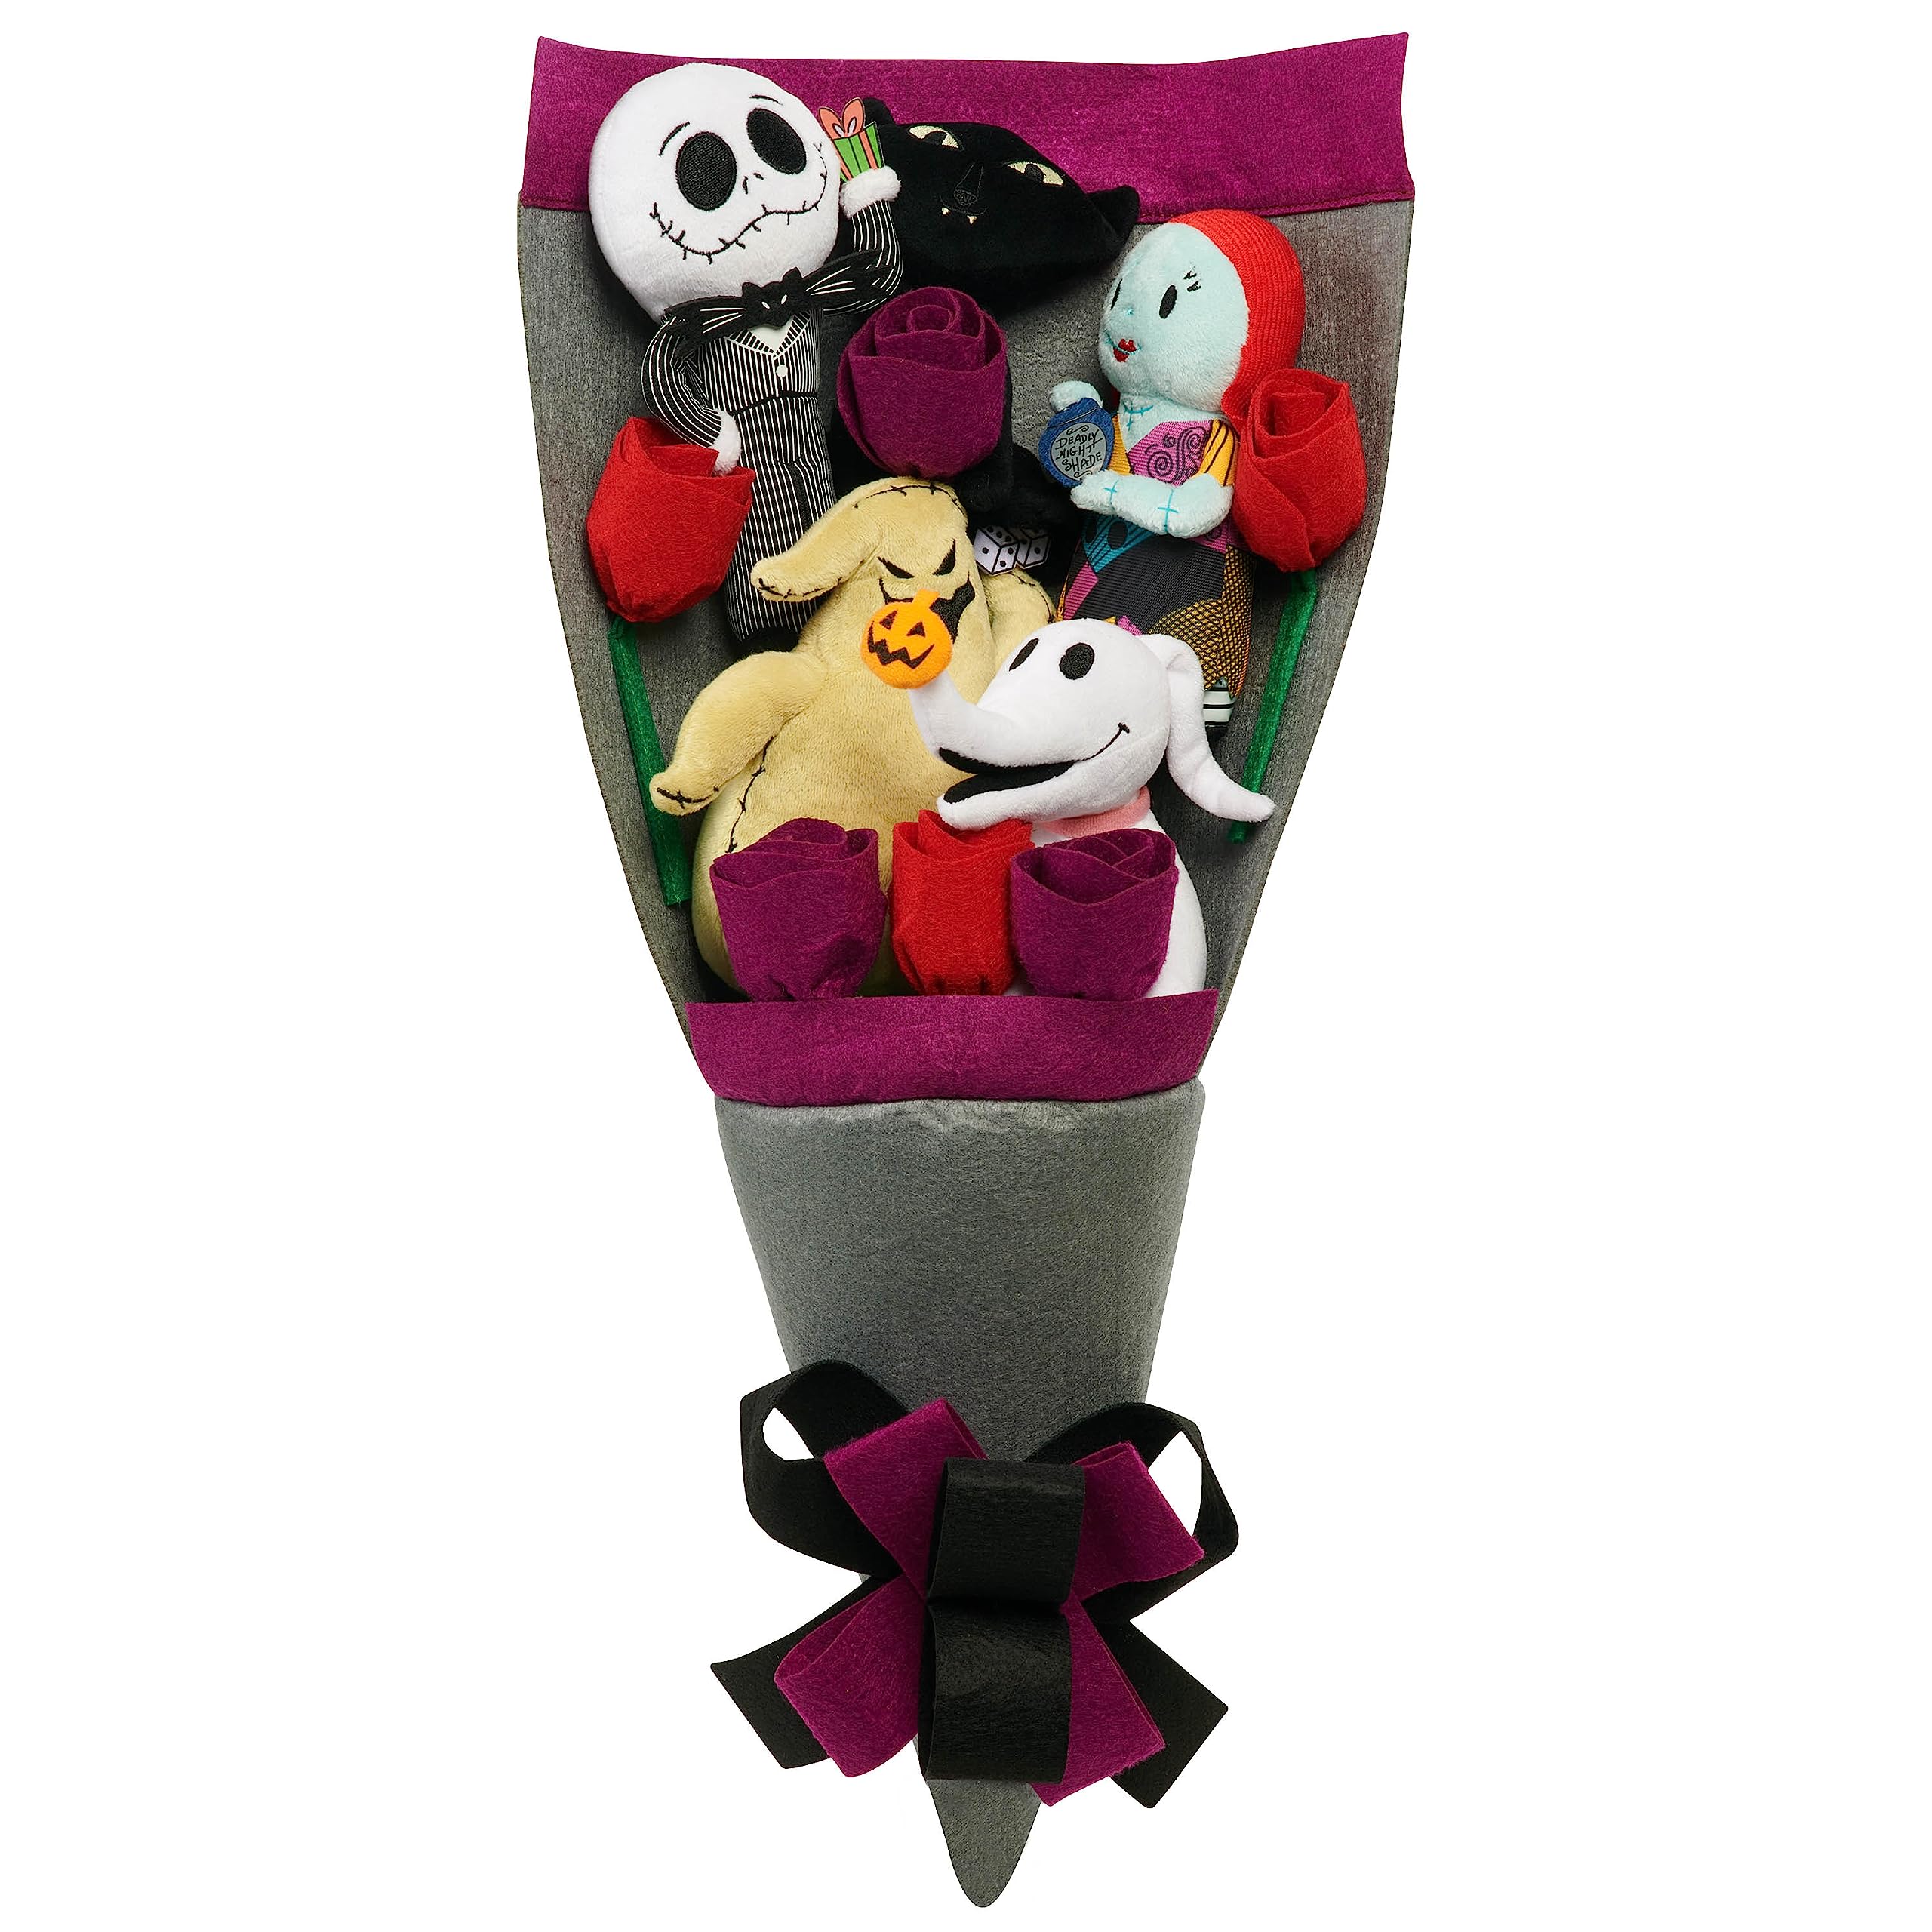 20" Disney Tim Burton's The Nightmare Before Christmas Plushies Bouquet w/ 5 Character Plushies and 6 Fabric Roses $26.74 + Free Shipping w/ Prime or on $35+